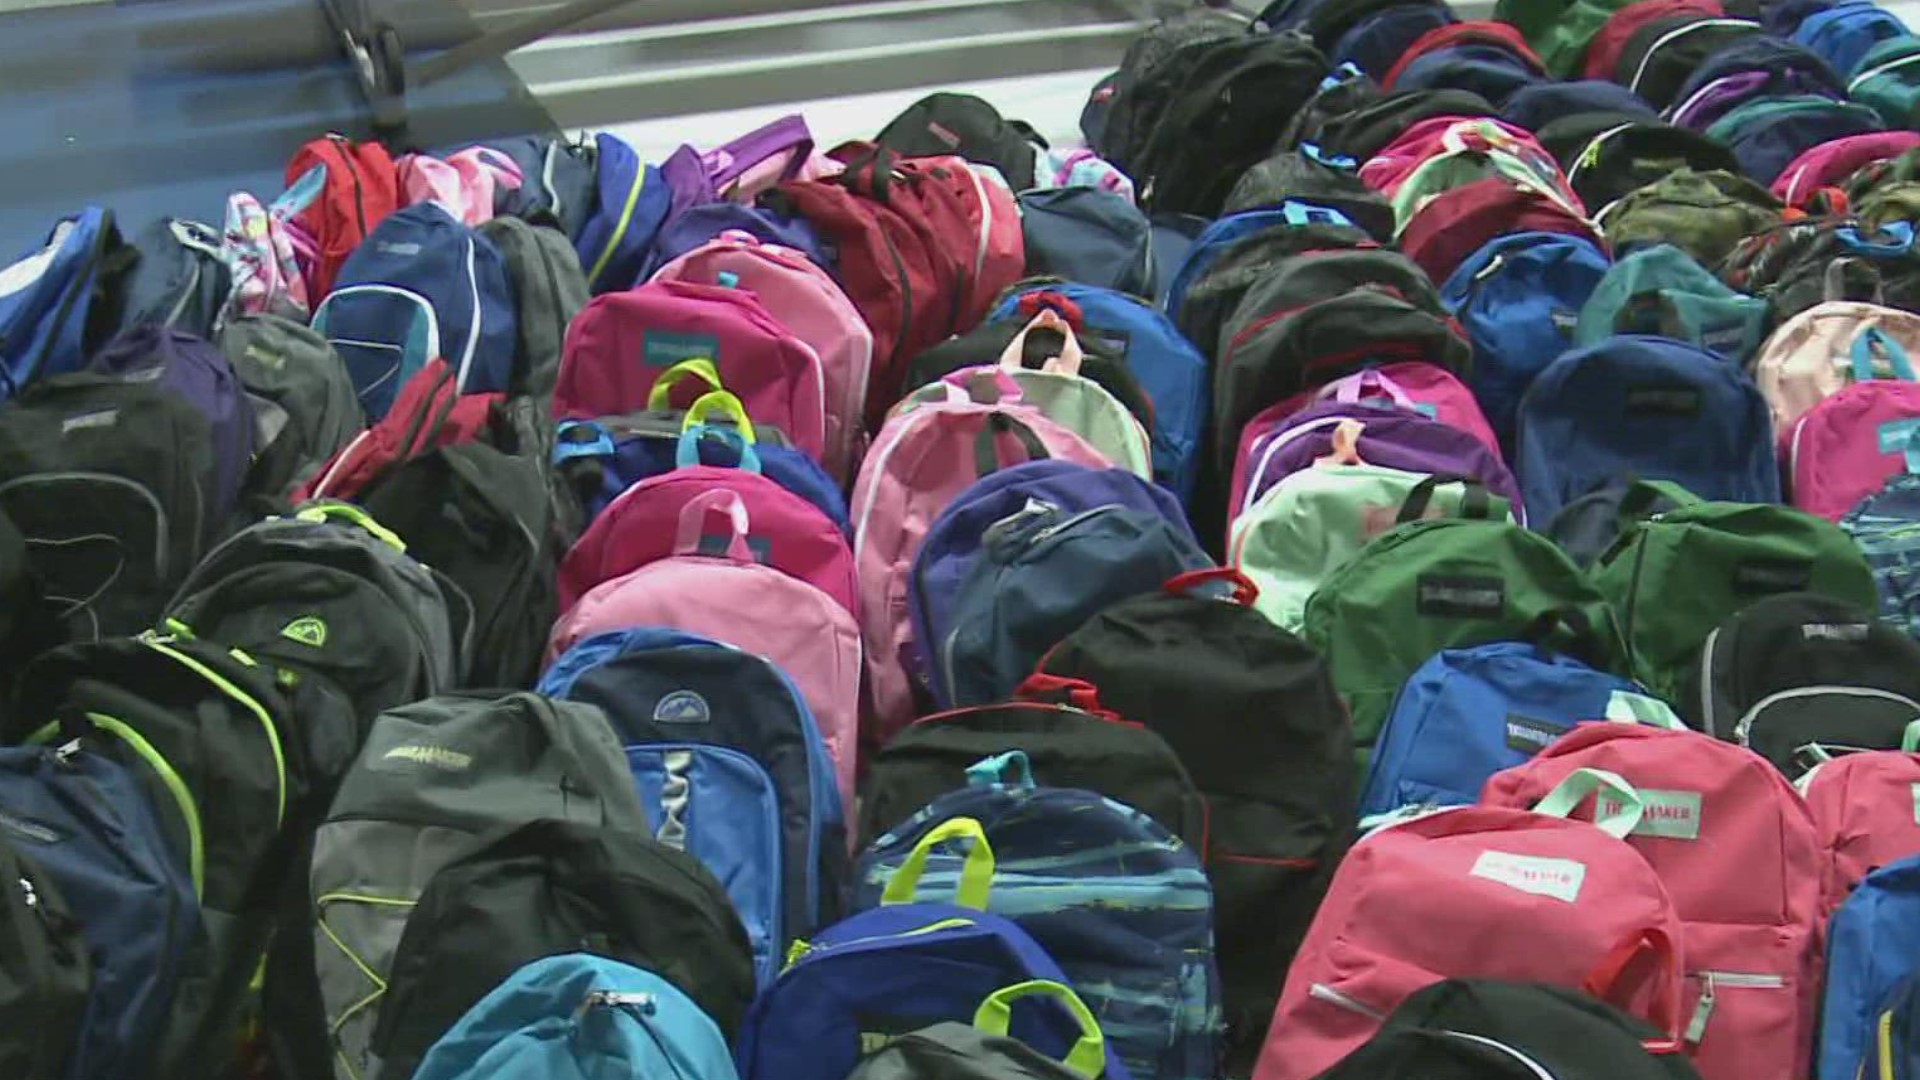 Because of the pandemic... our annual "2 Pack a Backpack" drive was once again a virtual event this year.